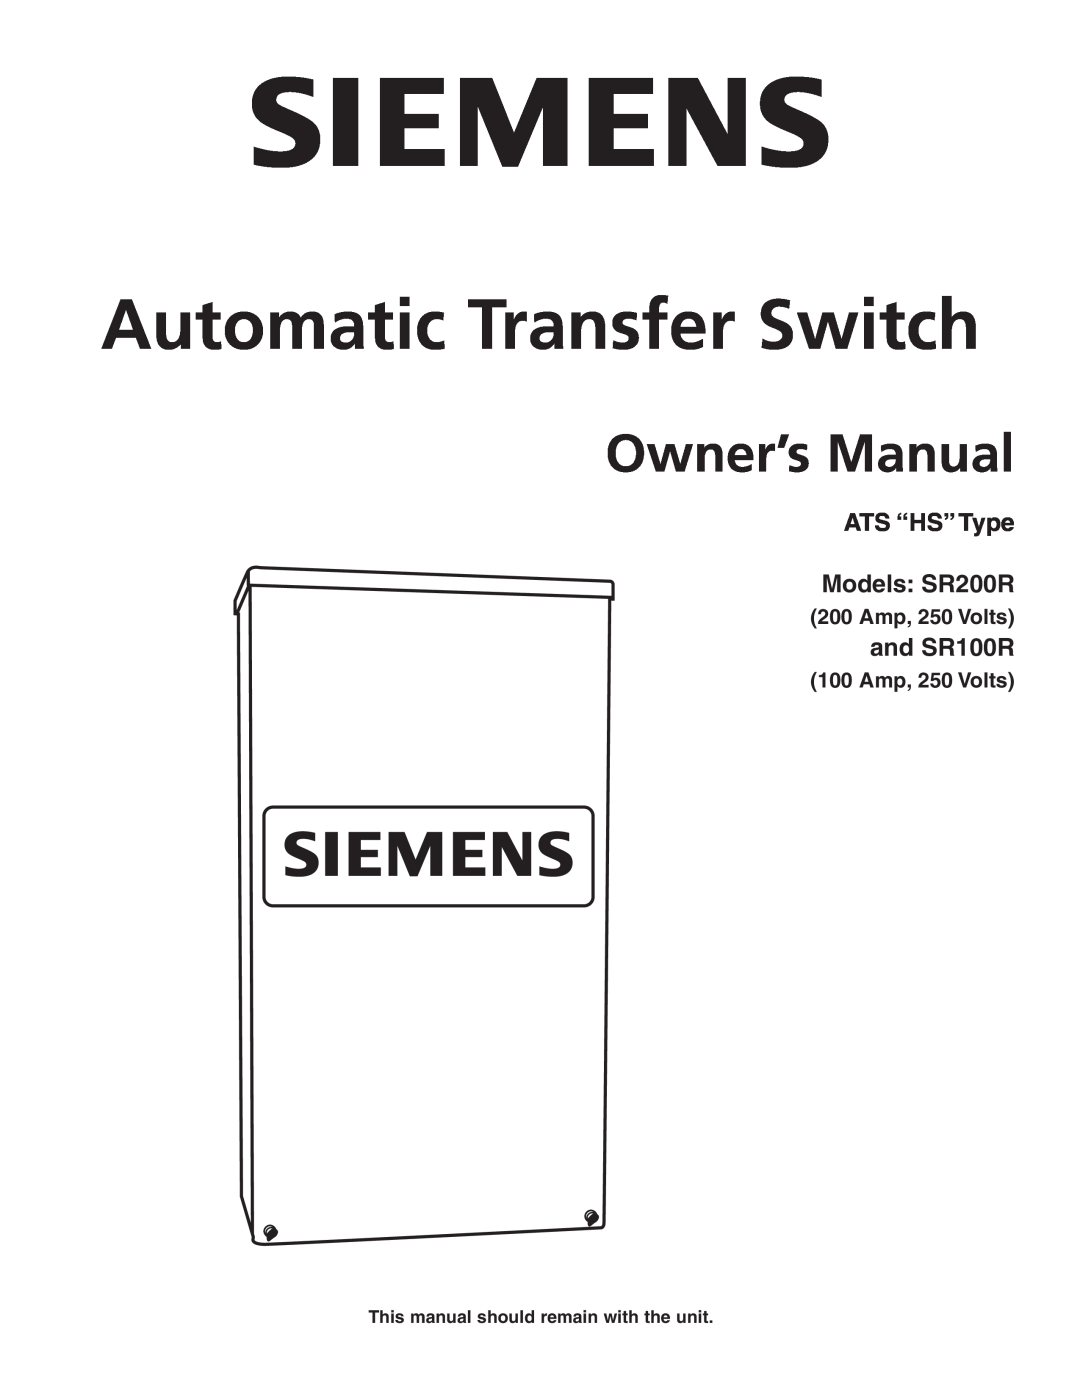 Siemens SR100R owner manual 200 Amp, 250 Volts, 100 Amp, 250 Volts, Automatic Transfer Switch, ATS “HS” Type Models SR200R 